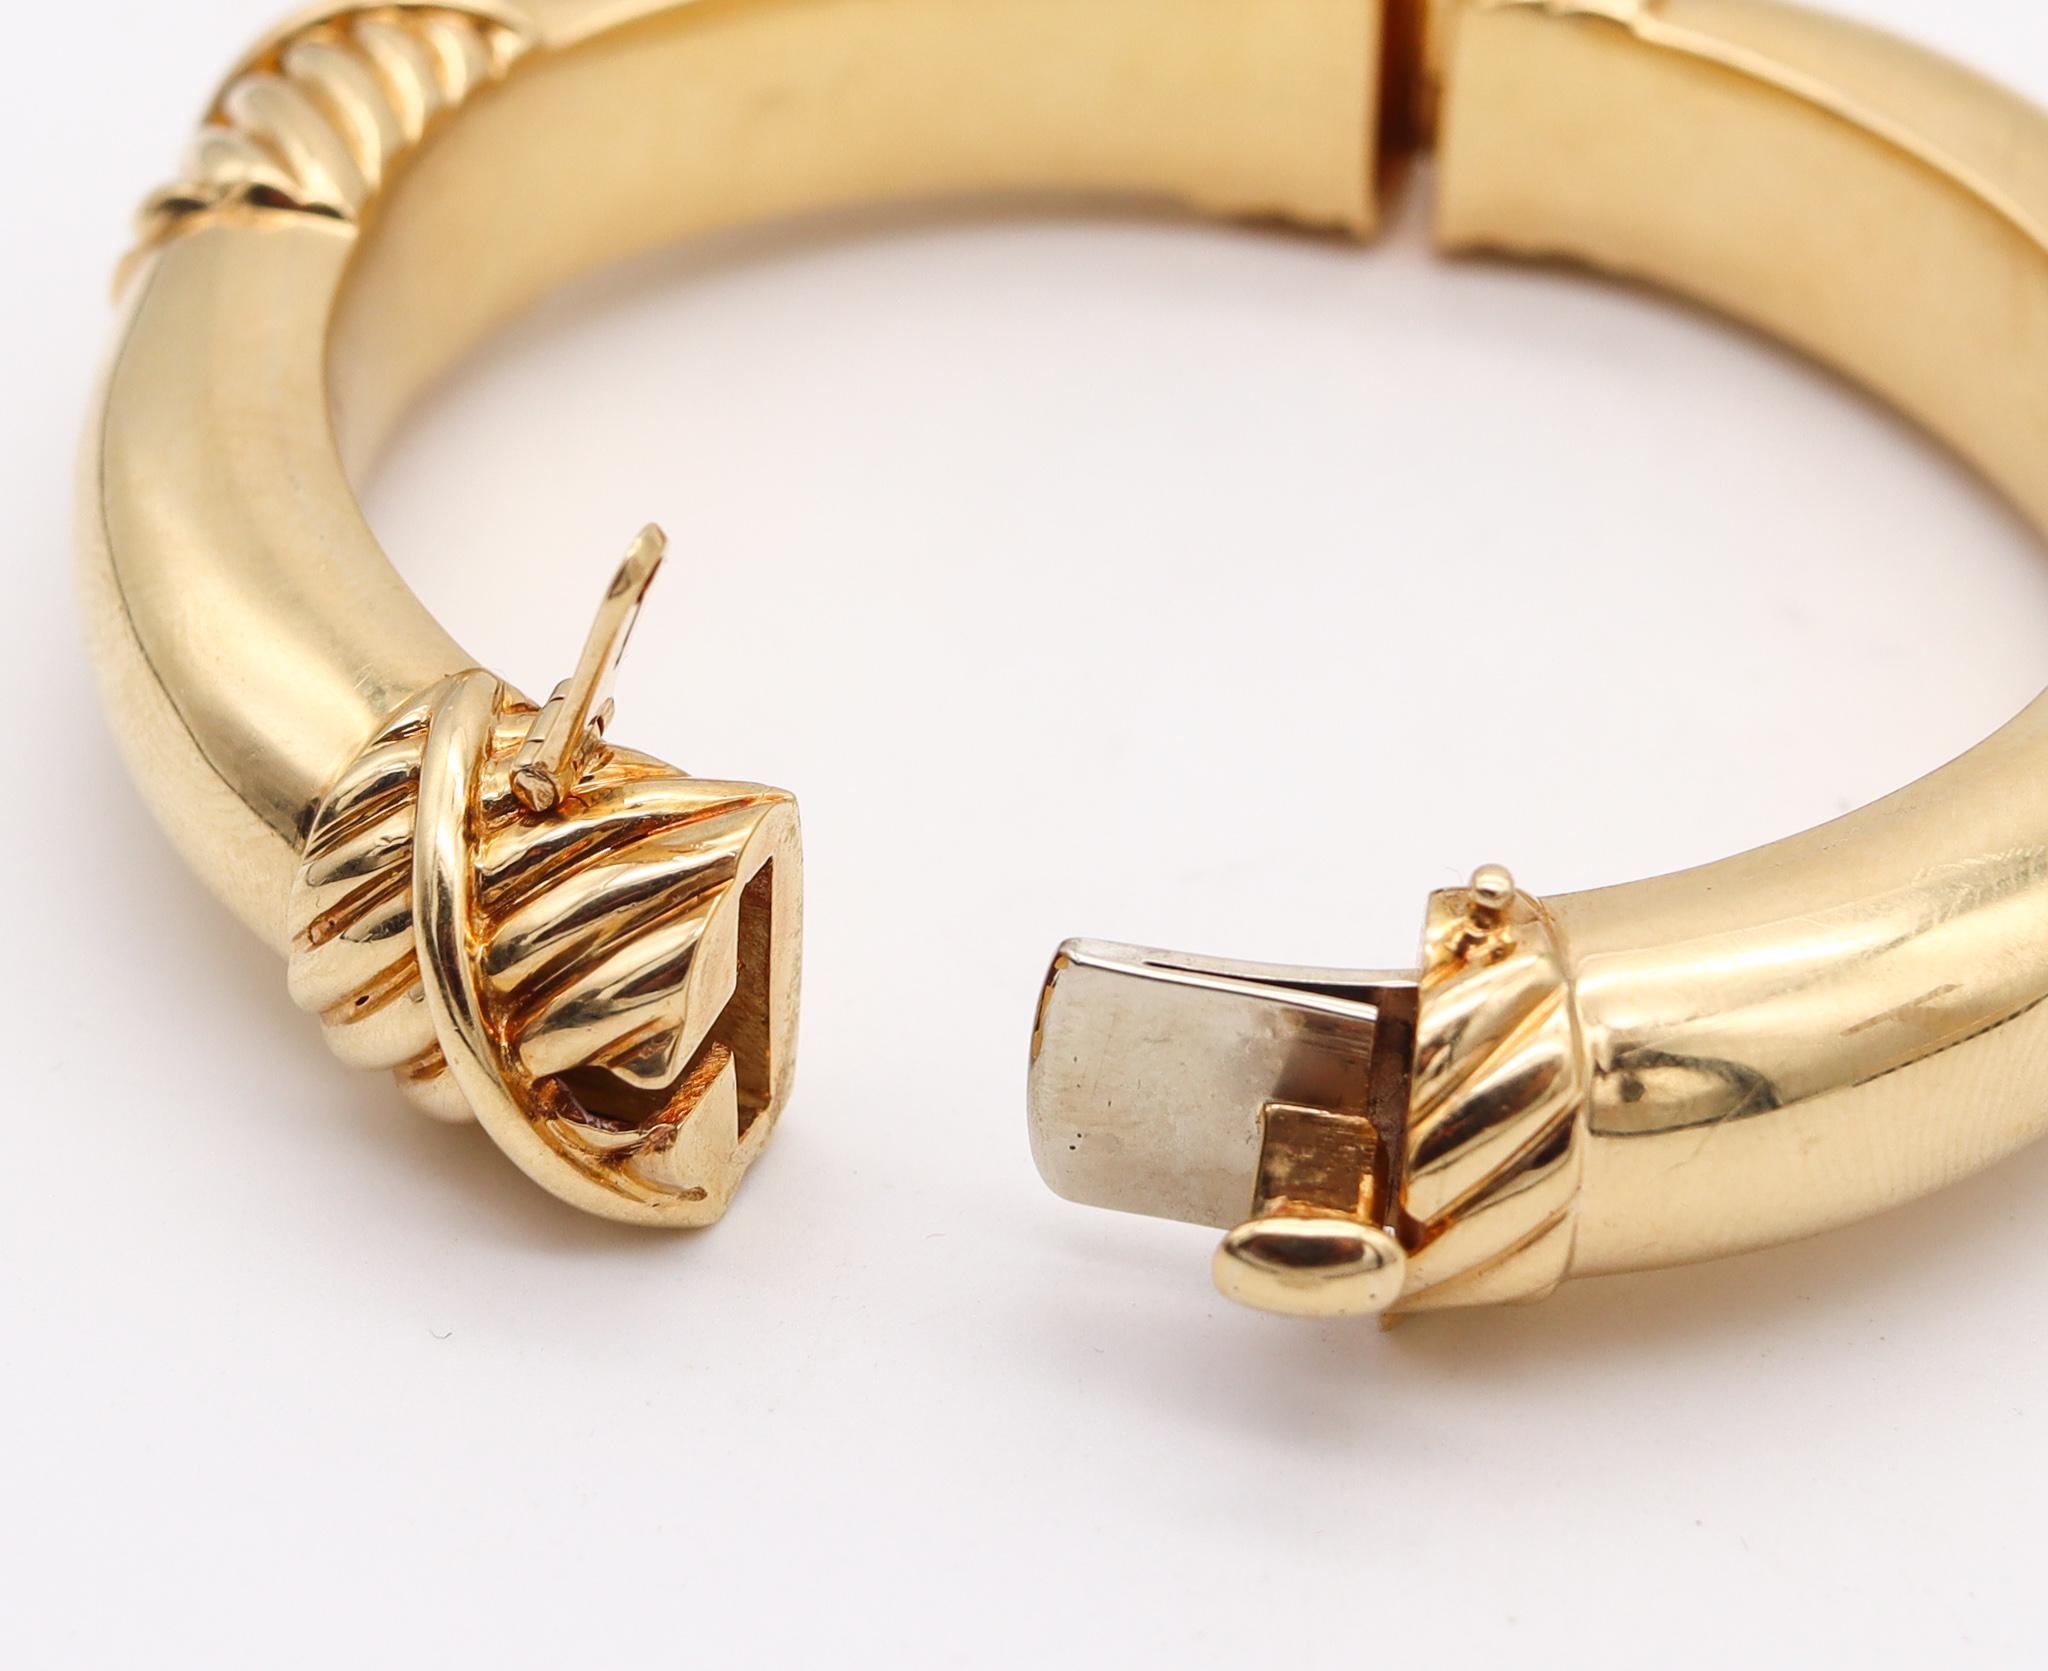 David Webb 1977 New York Vintage Bangle Bracelet in Solid 18kt Yellow Gold In Excellent Condition For Sale In Miami, FL